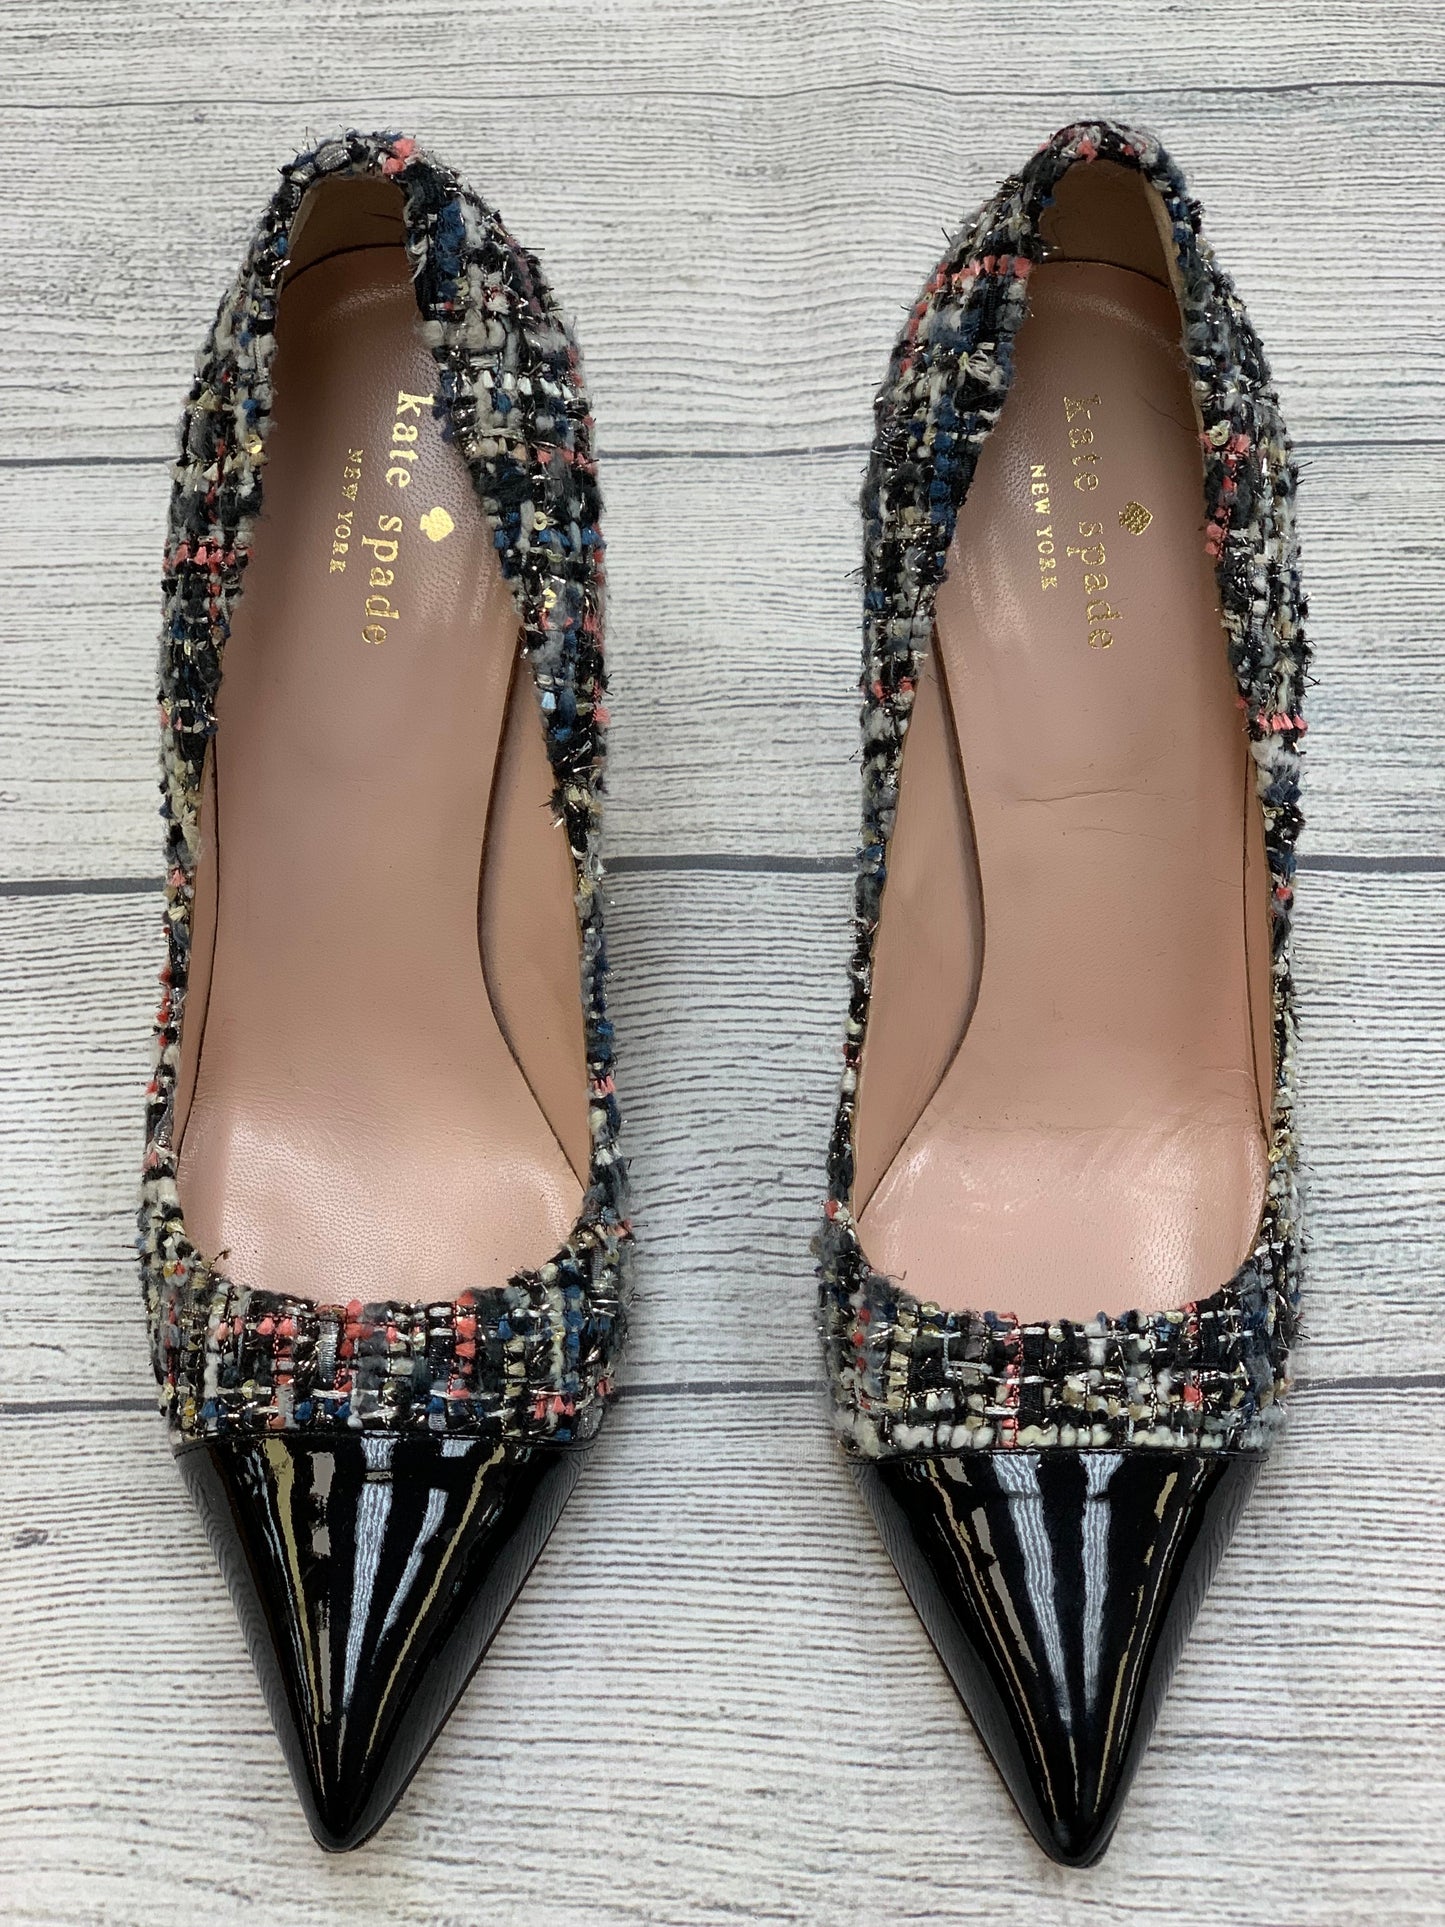 Multi-colored Shoes Heels Stiletto Kate Spade, Size 9.5